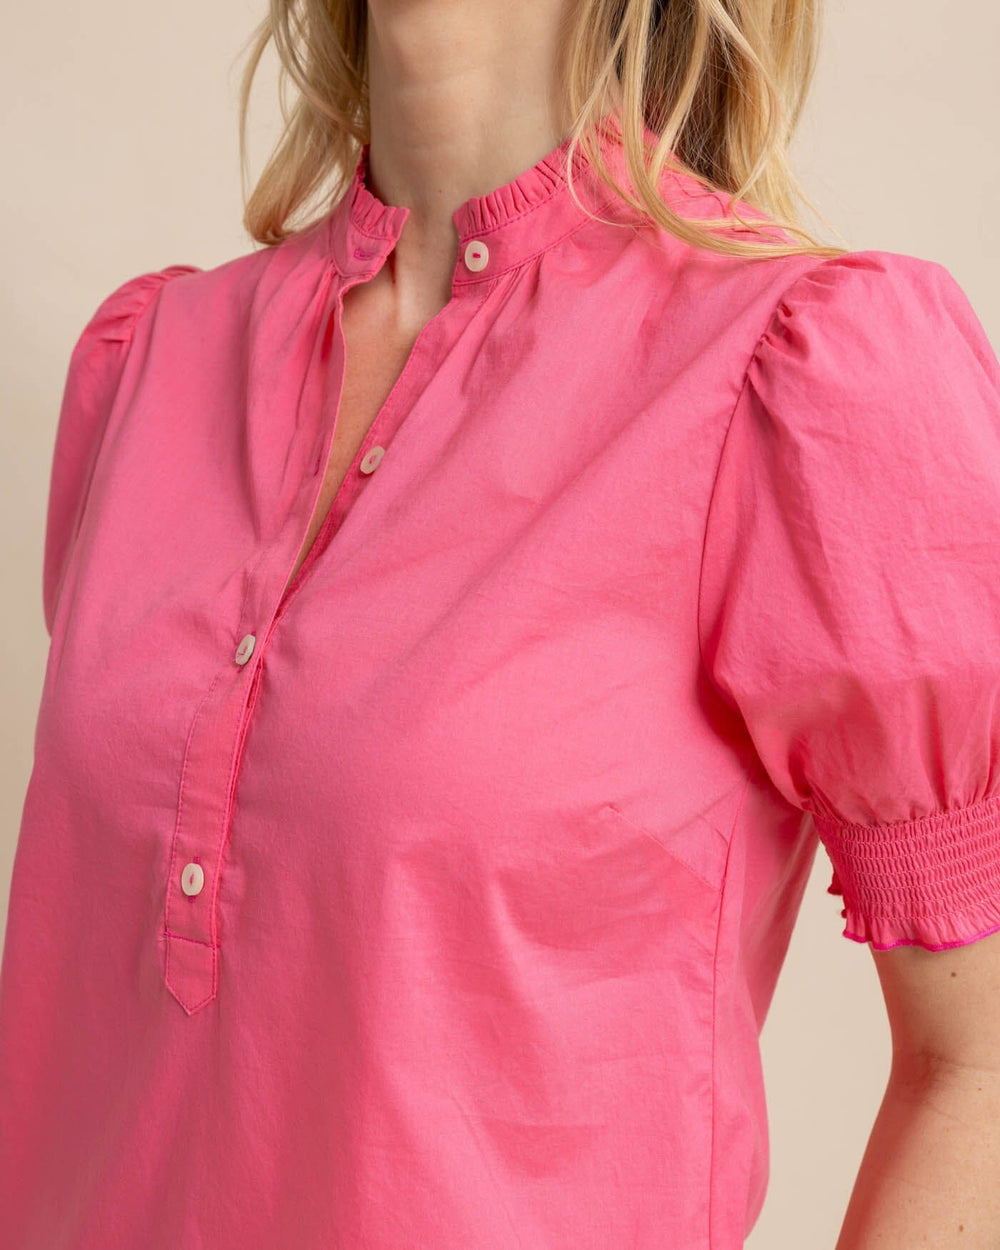 The detail view of the Southern Tide Meadow Lawn Blouse by Southern Tide - Camelia Rose Pink